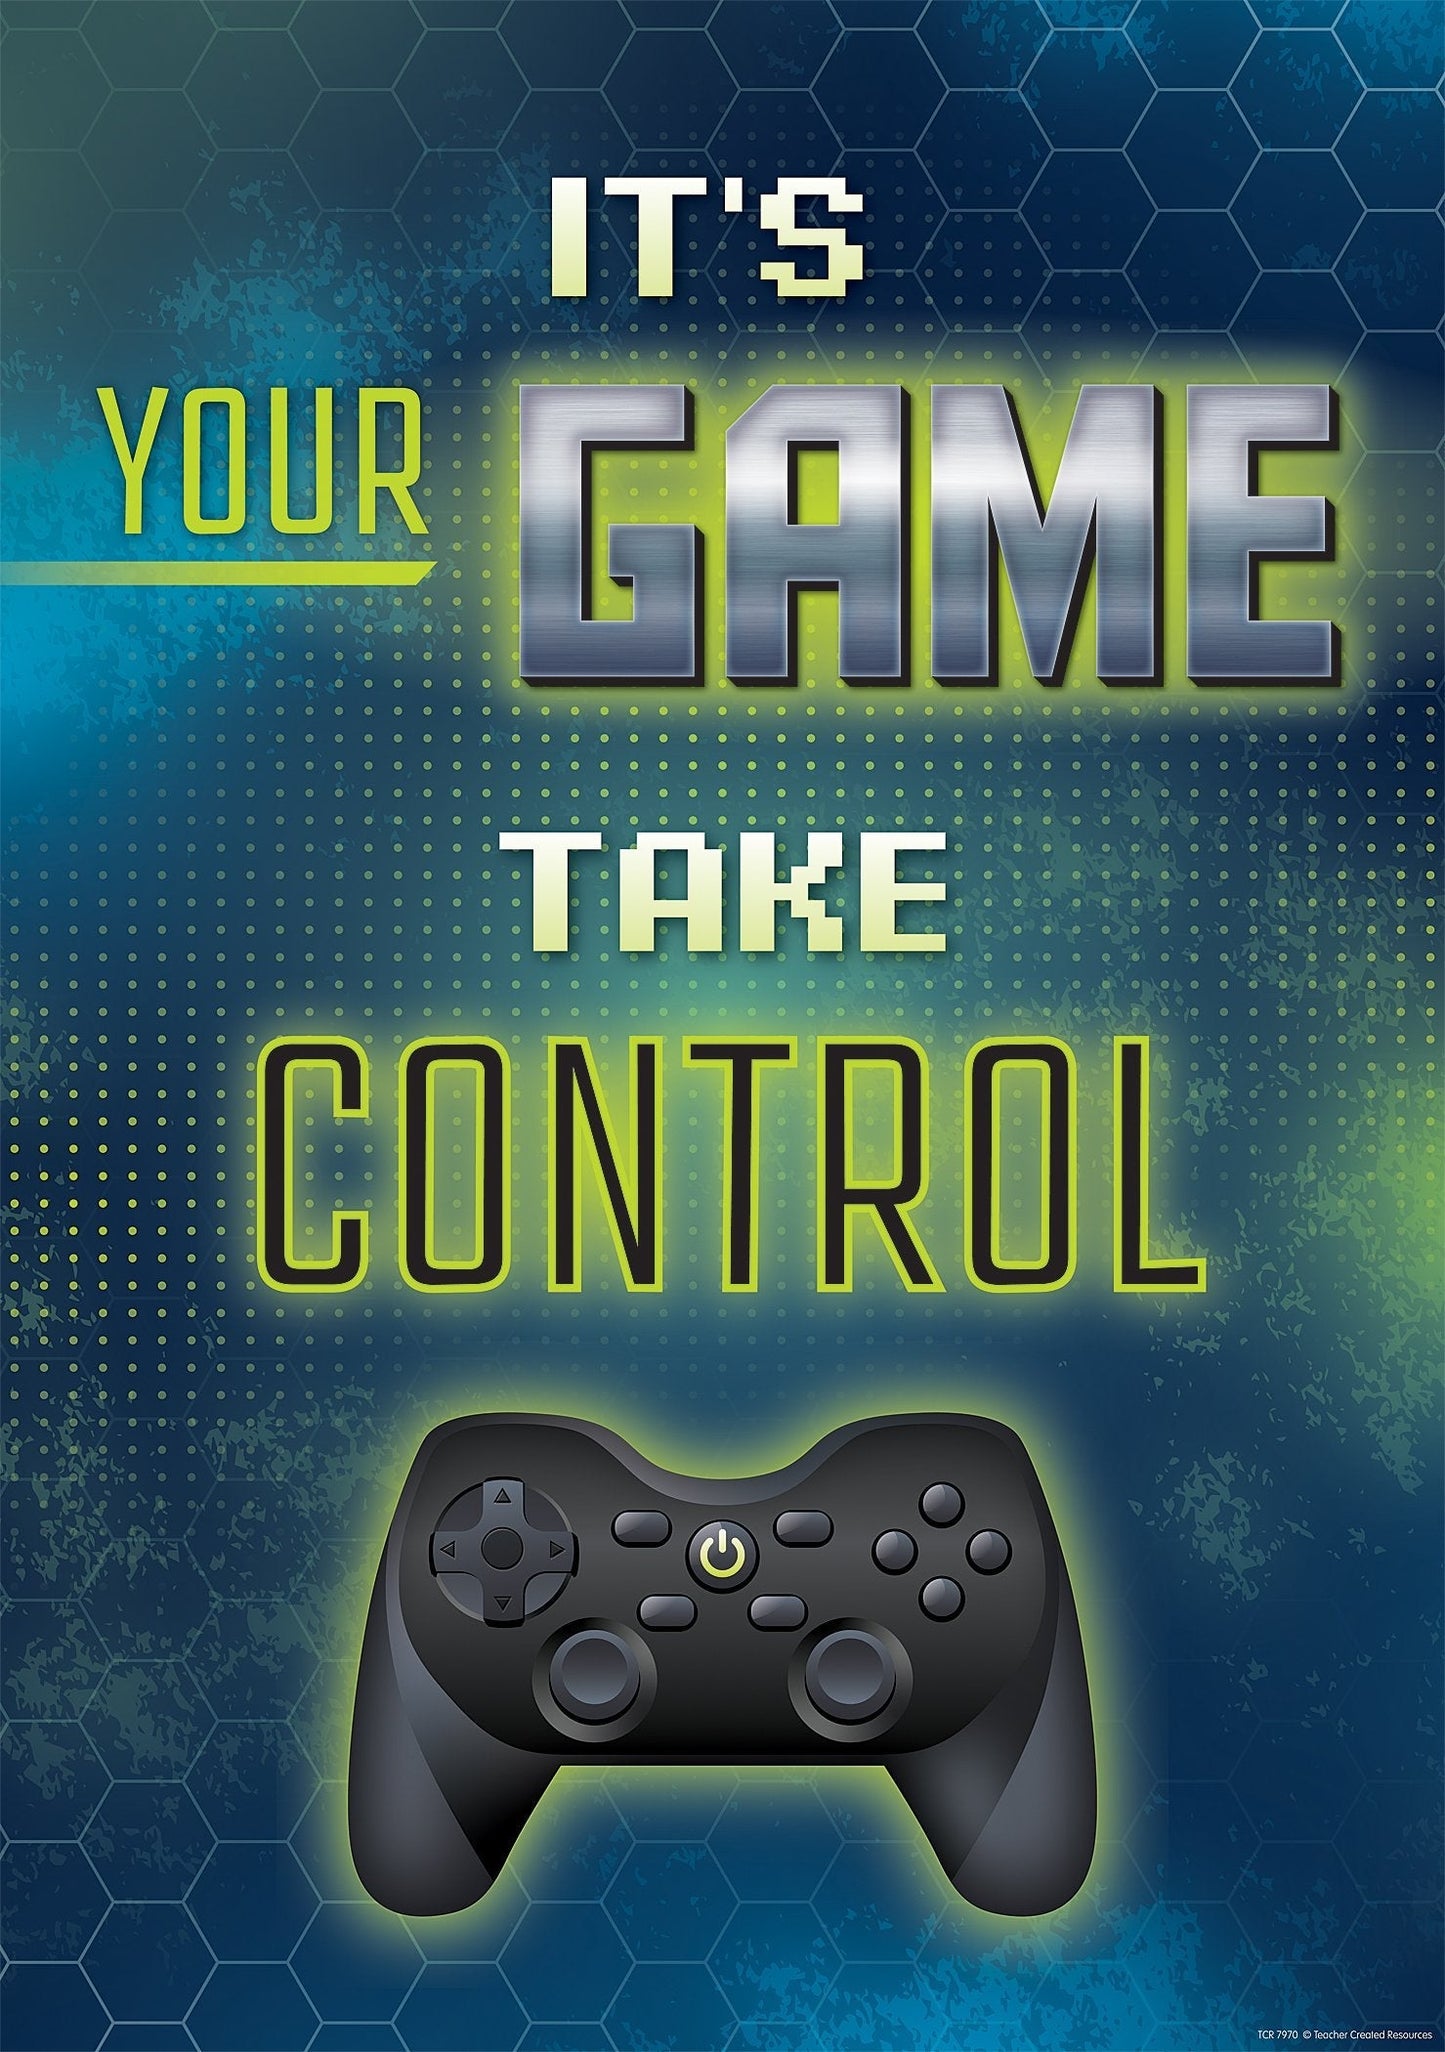 It's Your Game Take Control Positive Poster